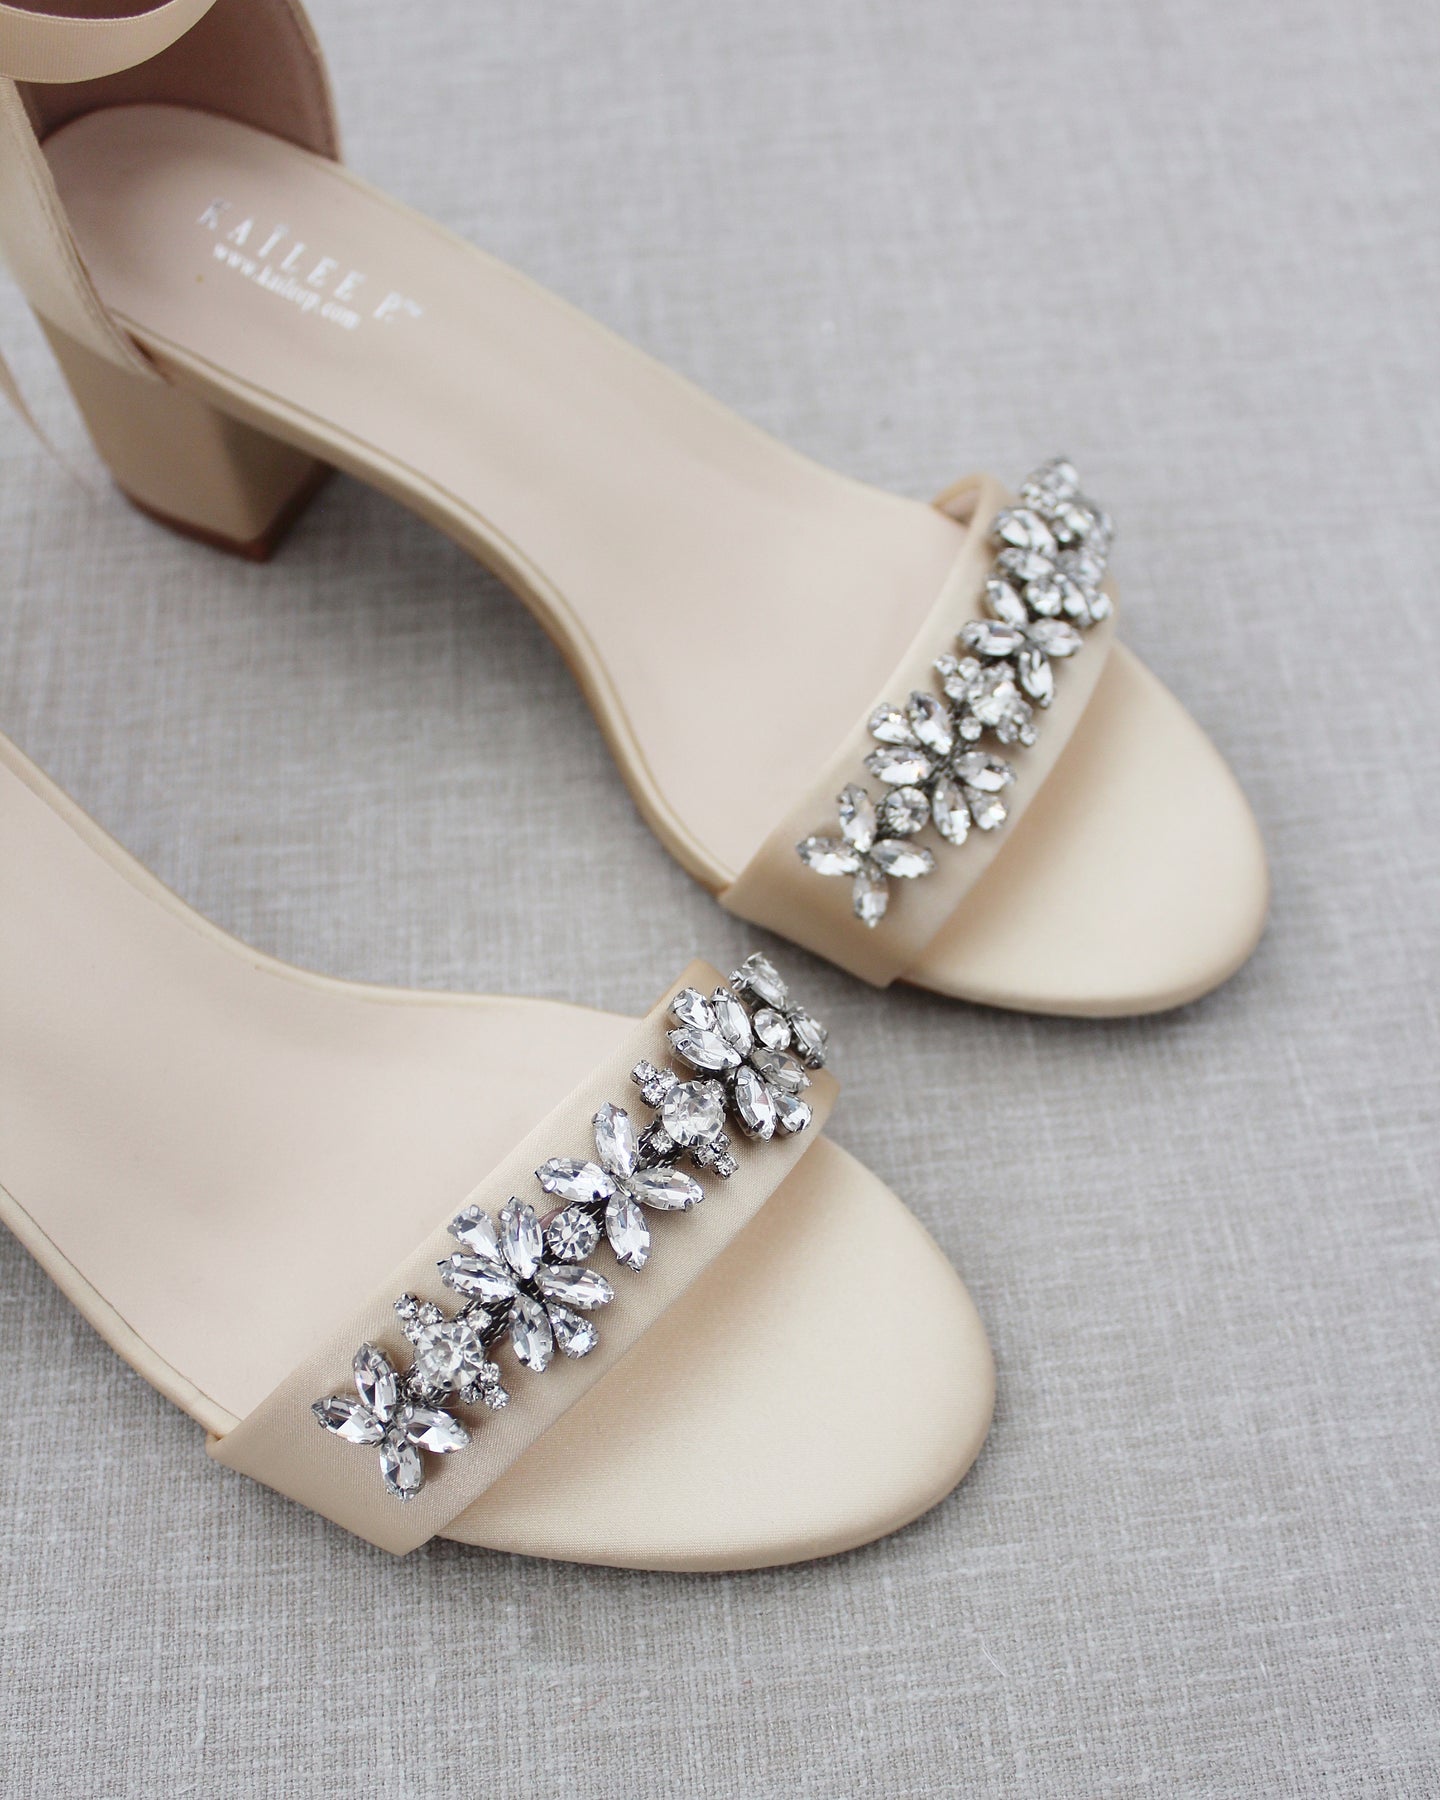 Champagne Satin Block Heel Sandals with FLORAL RHINESTONES on Upper St ...